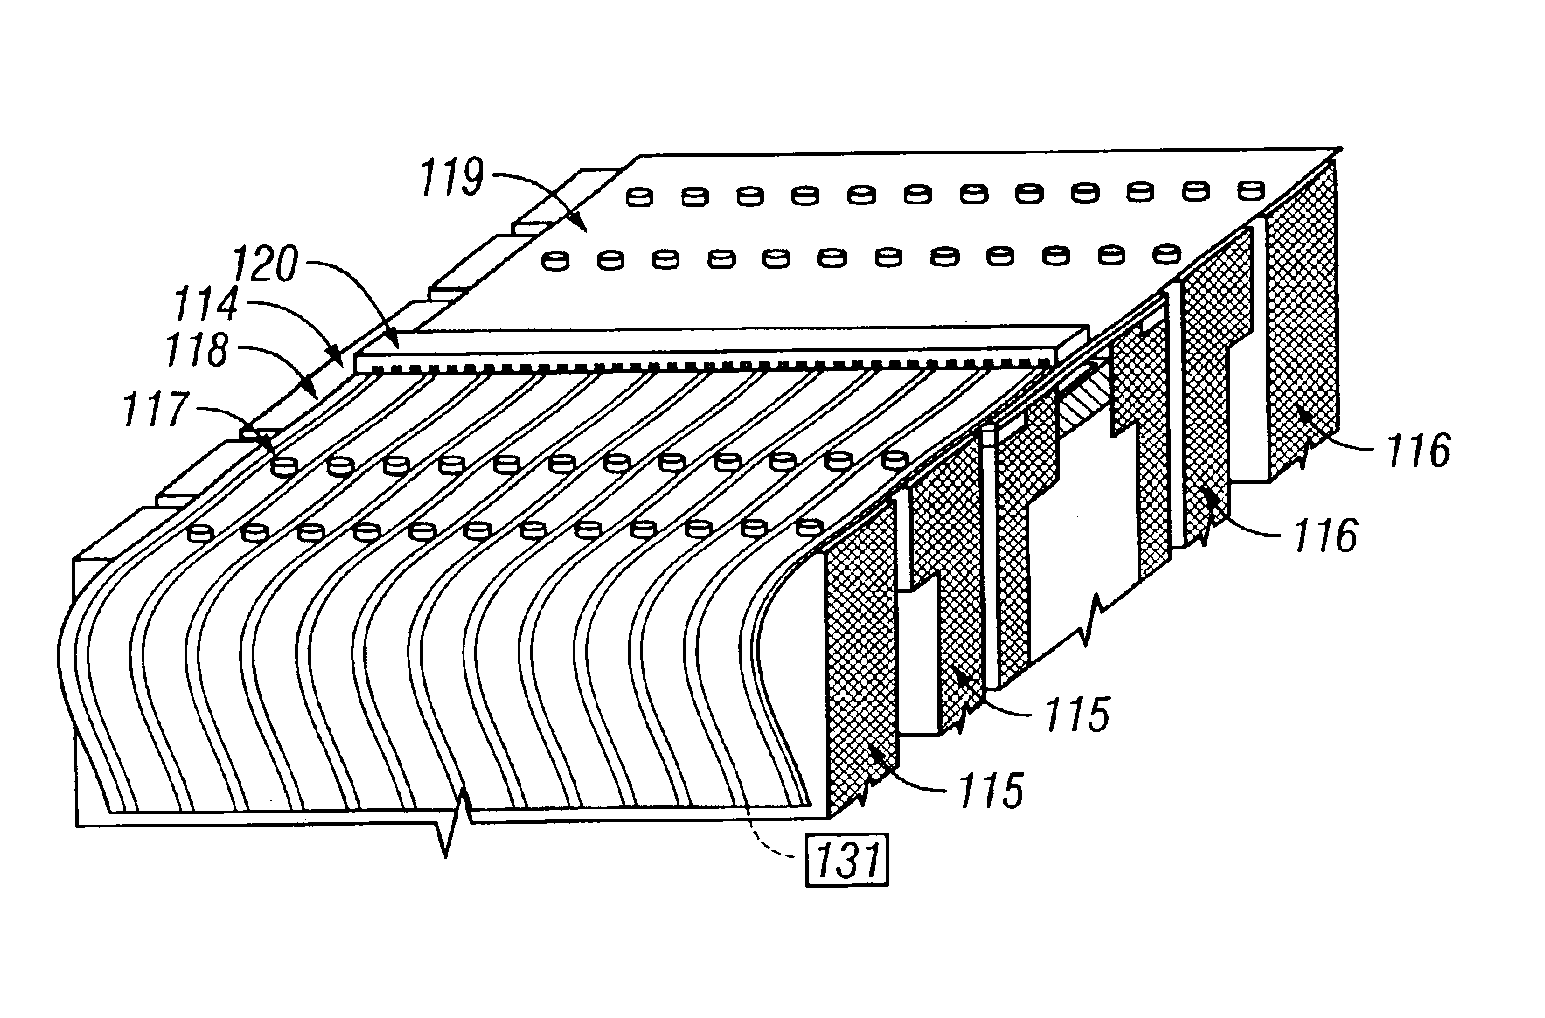 Multi-chambered, compliant apparatus for restraining workpiece and applying variable pressure thereto during lapping to improve flatness characteristics of workpiece